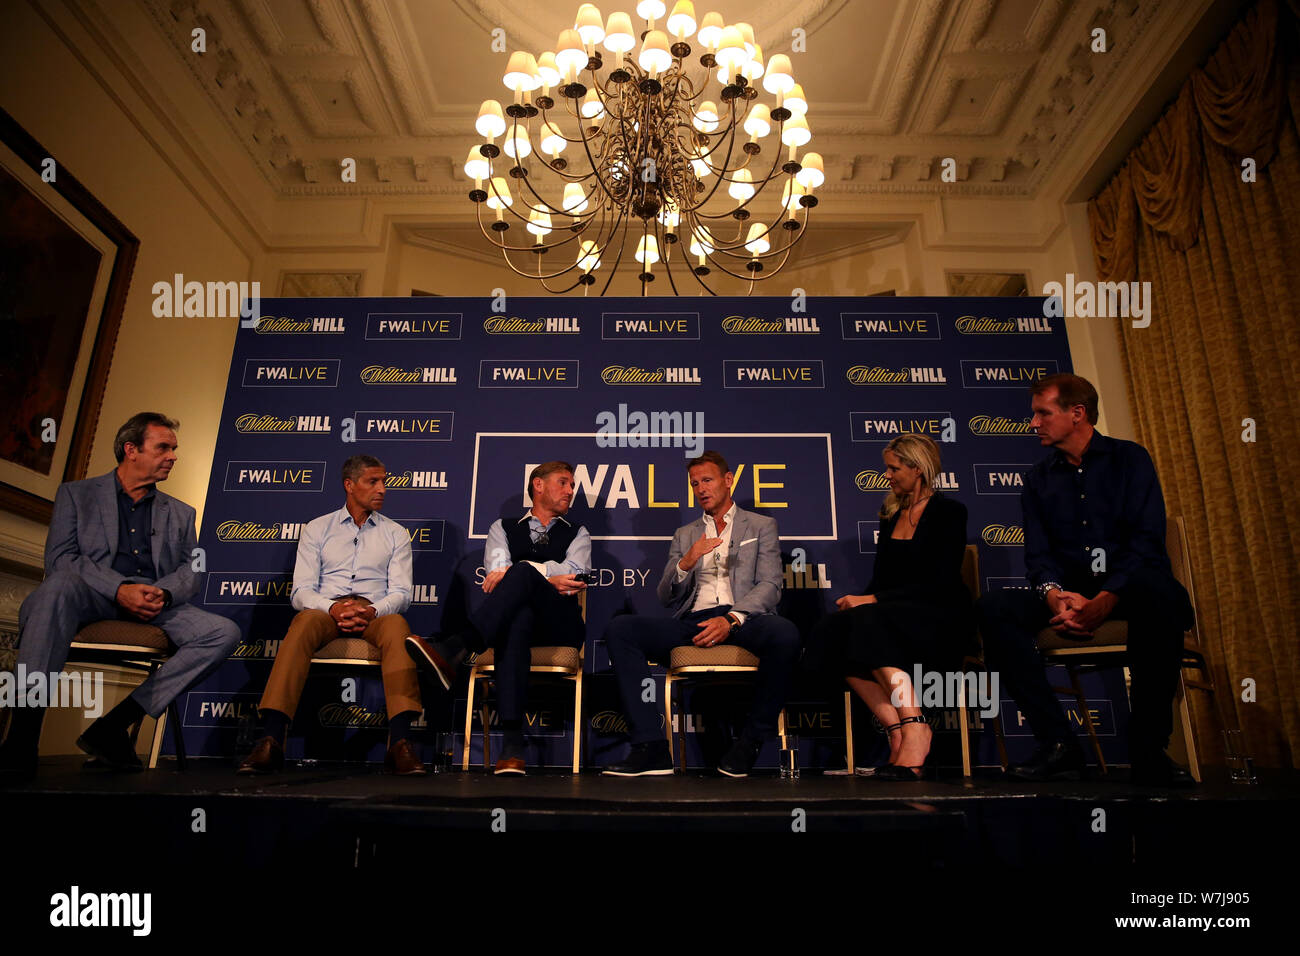 (Left to right) Gerry Cox- Former Chairman of FWA/ Hayters TV, Chris Hughton- Former Brighton Manager, Simon Jordan- Former Crystal Palace Owner & Broadcaster, Teddy Sheringham, Carrie Brown- FWA Chair and Henry Winter- Sports Editor of The Times during the FWA Live Season Preview at The Landmark Hotel, London. Stock Photo